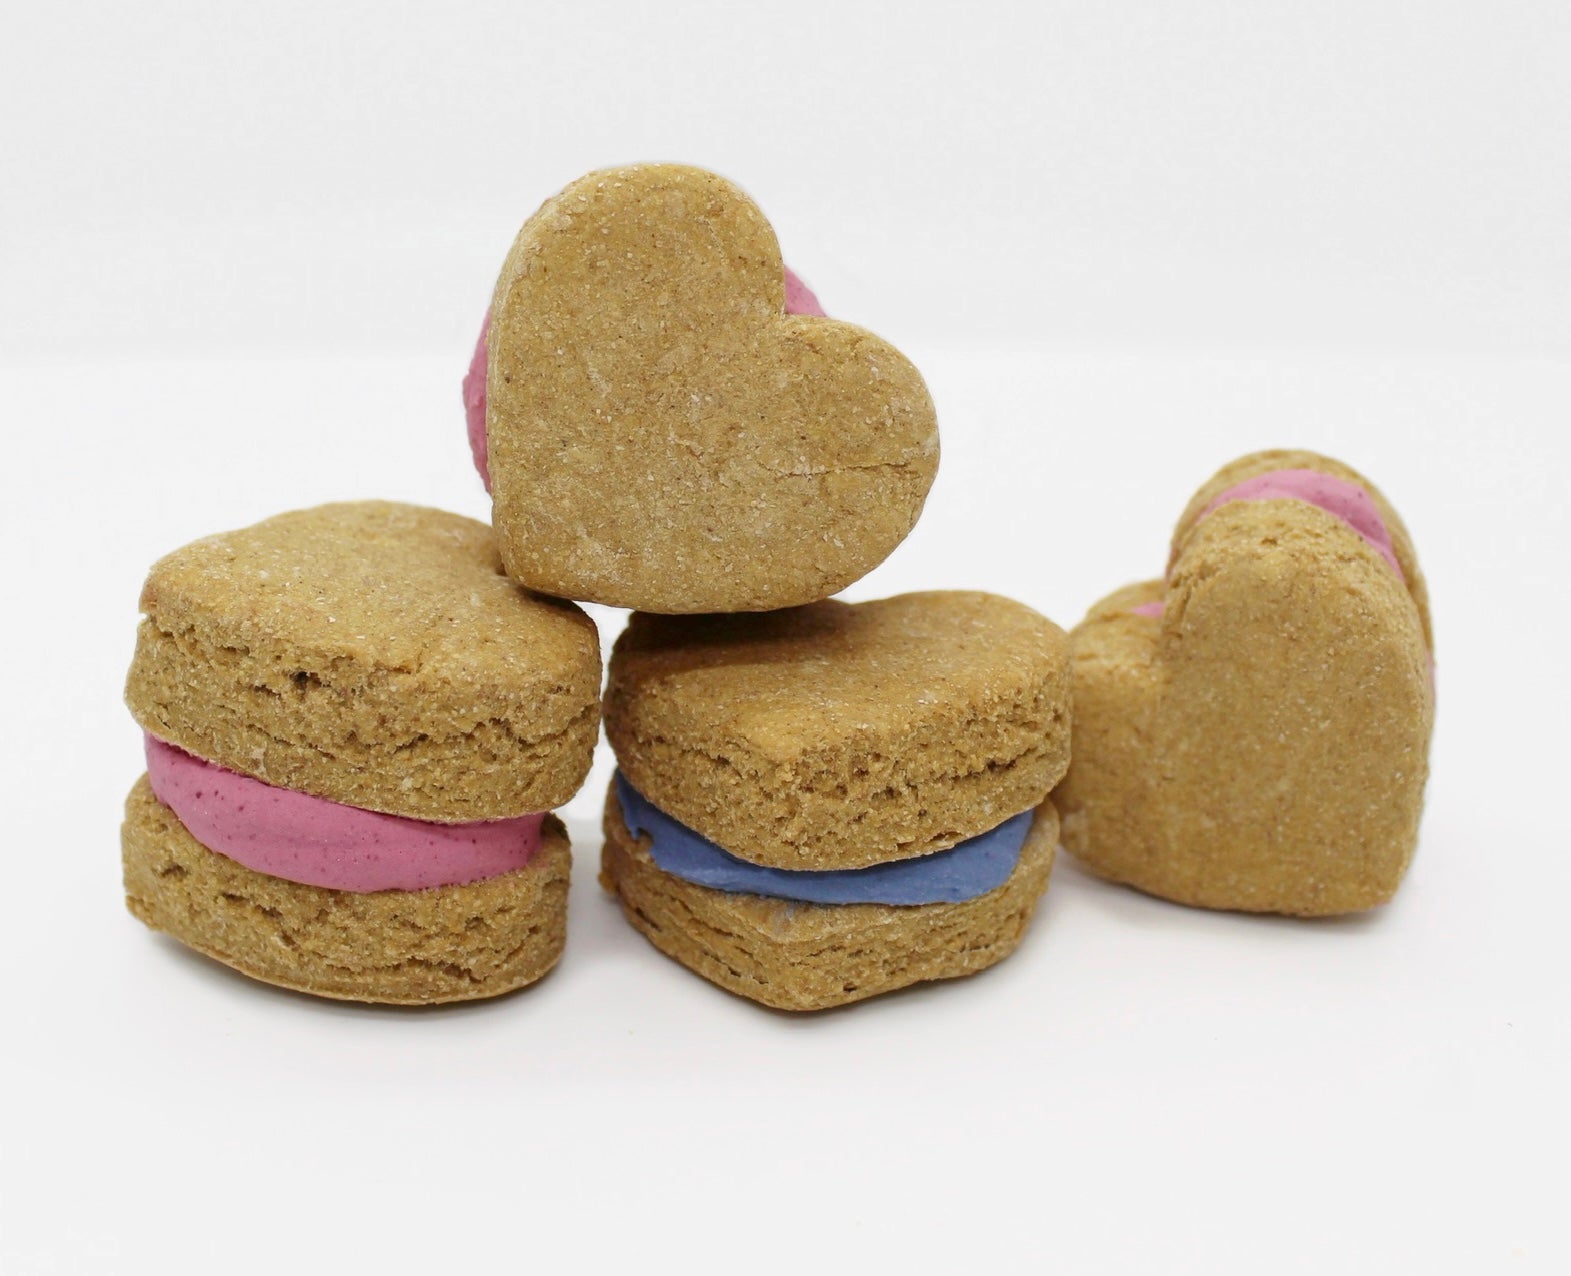 Four apple and banana heart shaped whoopies with dog safe icing in the middle. Three of the whoopies have pink icing in the middle and one has blue icing.